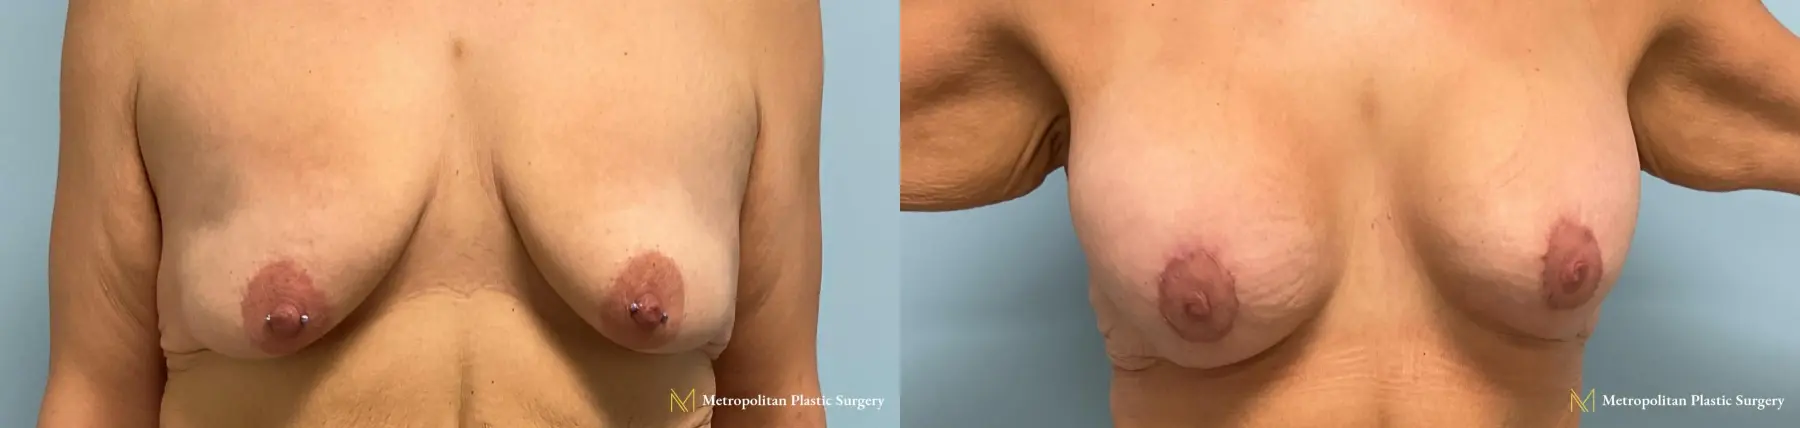 Before and after breast augmentation surgery by Julia Spears MD - Before and After